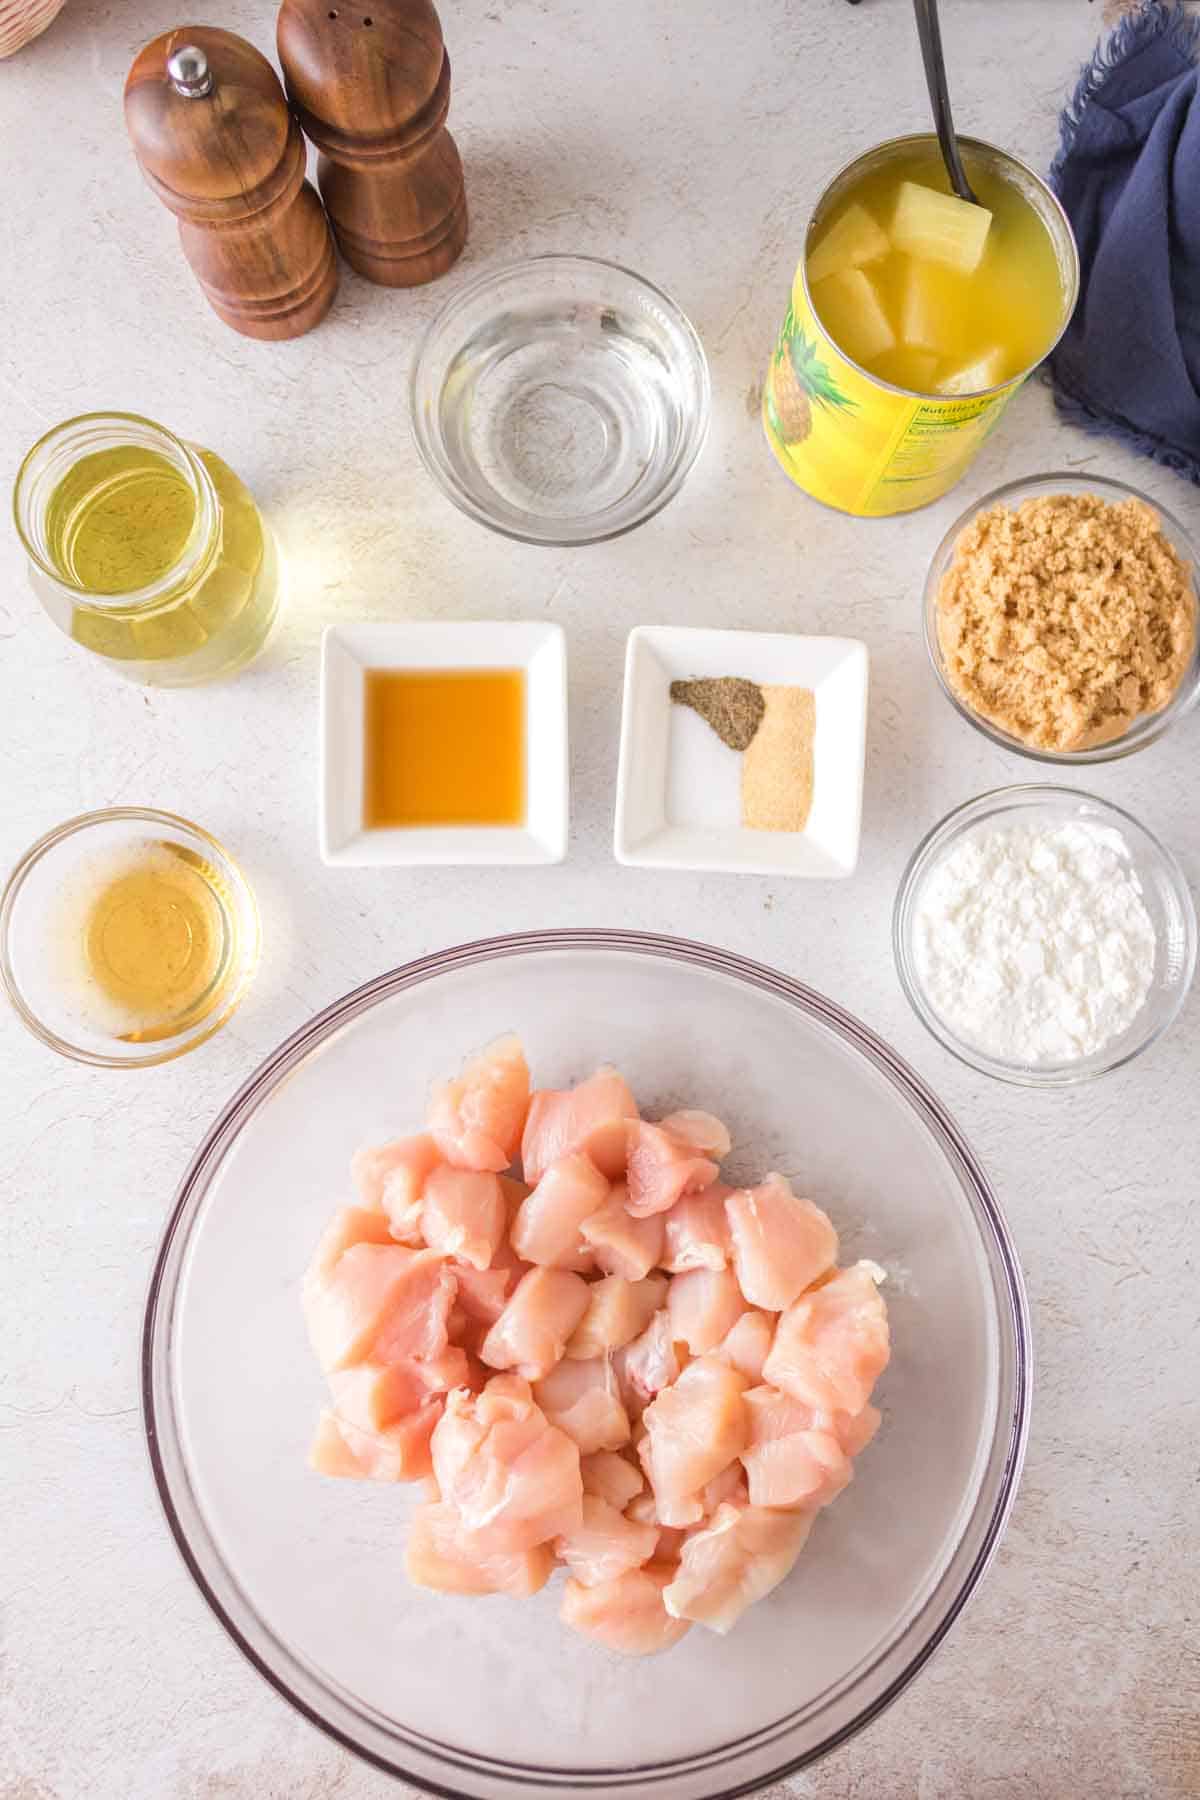 Ingredients for pineapple chicken